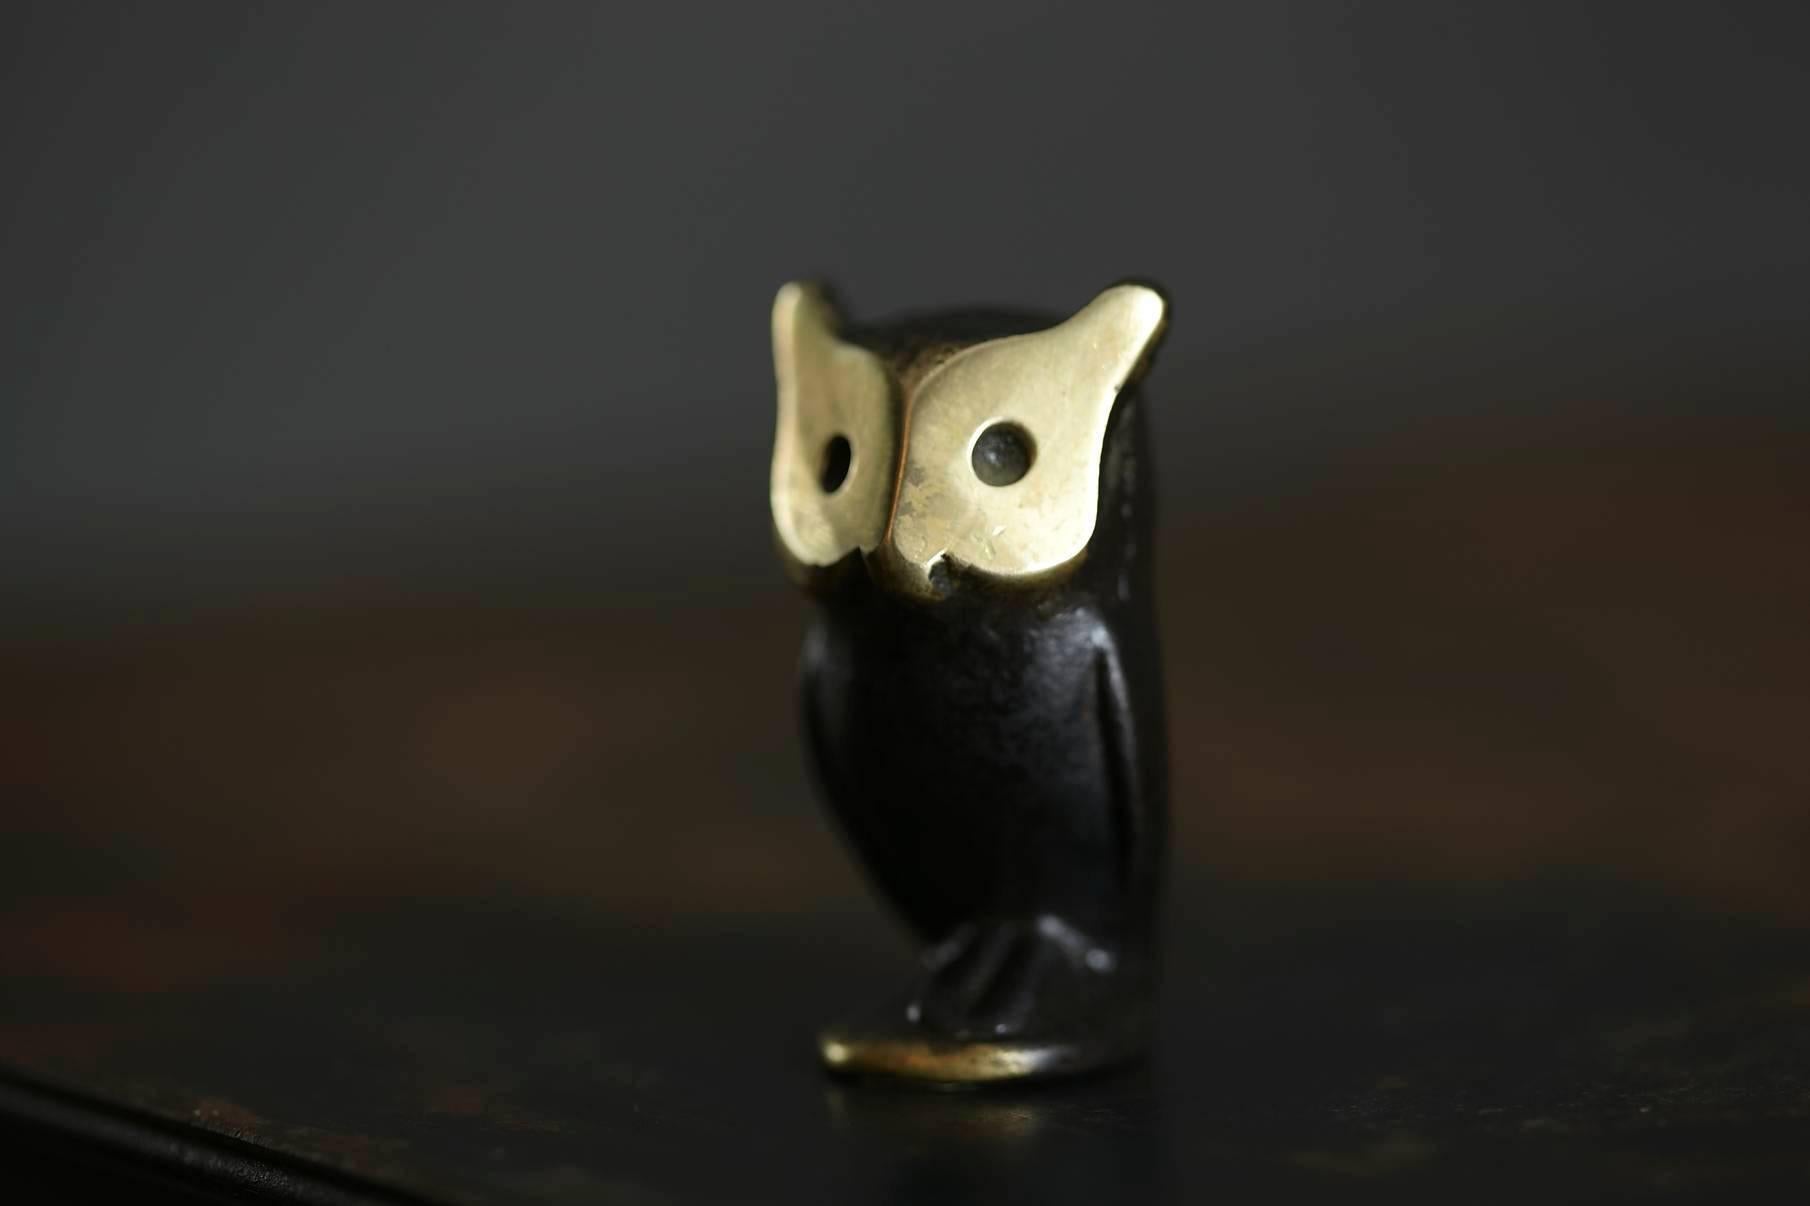 A very charming little brass owl figurine. Another one of Walter Bosses' humorous animal designs in brass.
Manufactured by Hertha Baller in Austria in the 1950s. The figurine is in excellent condition.
In the 1950s Bosse developed an innovative